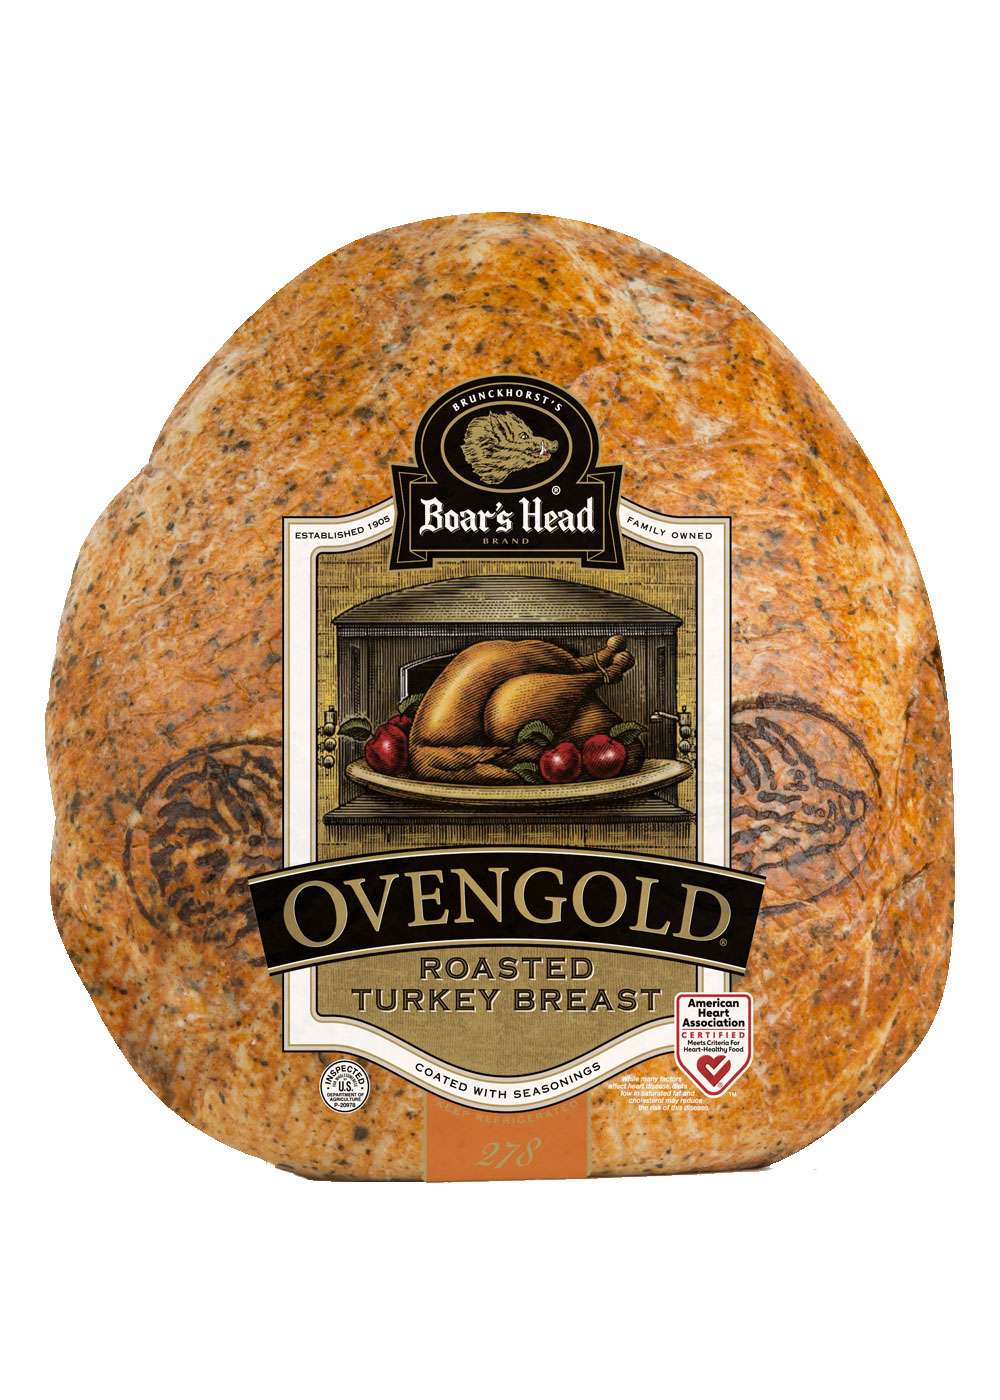 Boar's Head Ovengold Roasted Turkey Breast; image 1 of 2